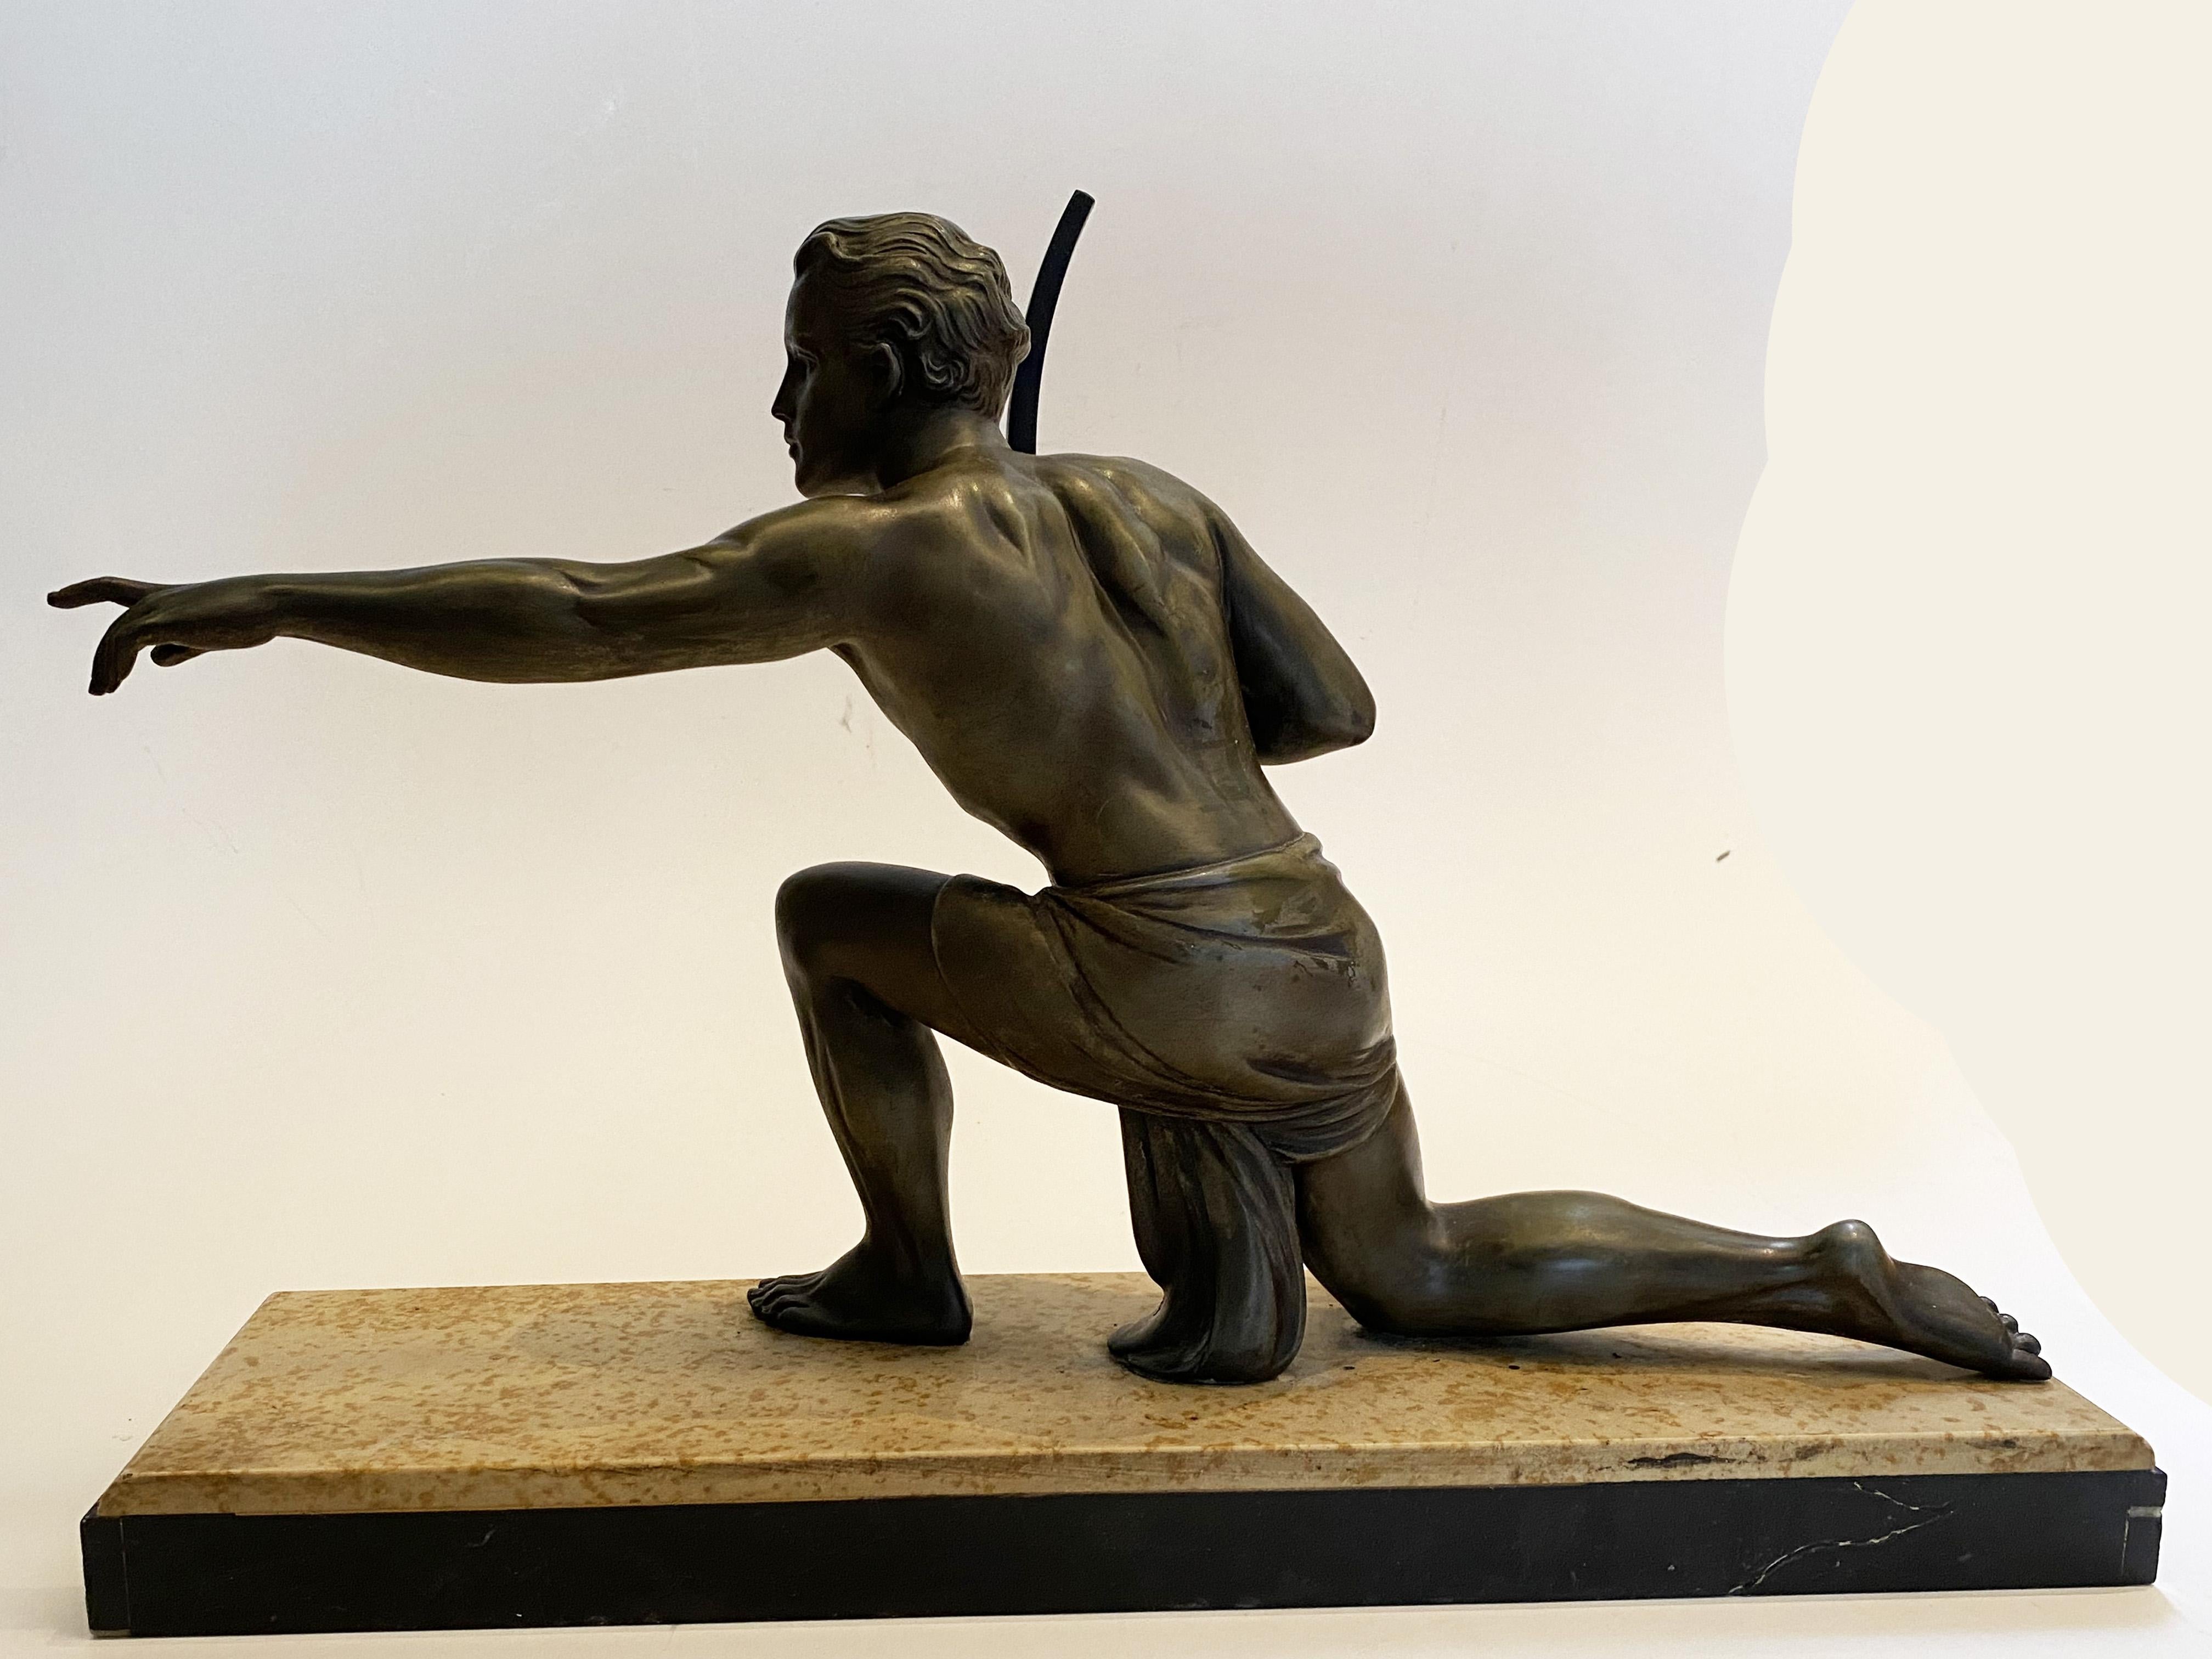 Early 20th Century Art Deco Archer Sculpture, Man with a bow, by Jean de Roncourt, France, 1920s.